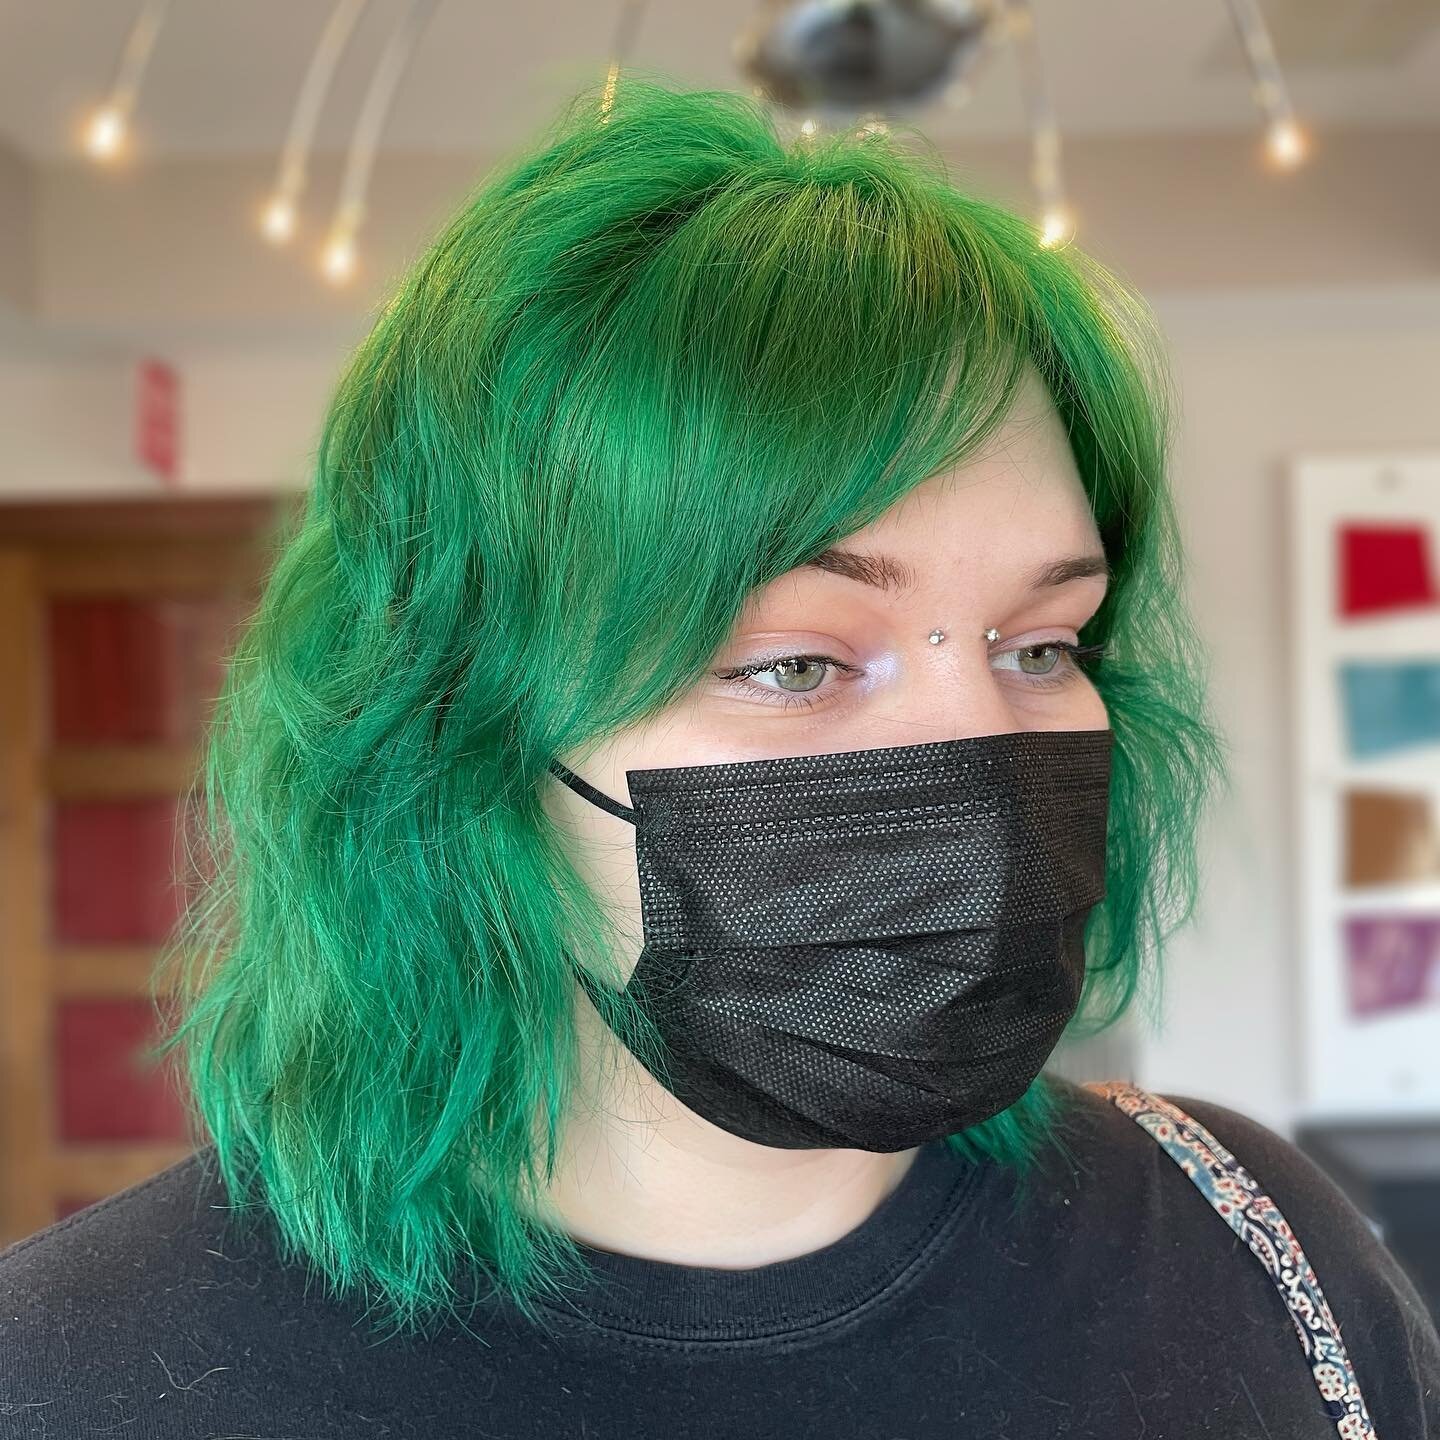 Absolutely love the way this hair color looks with Lark&rsquo;s eyes 😍💚

My first availability for Fantasy color is in June, so if you&rsquo;re looking for fun summer hair, fill out an appointment request form today.